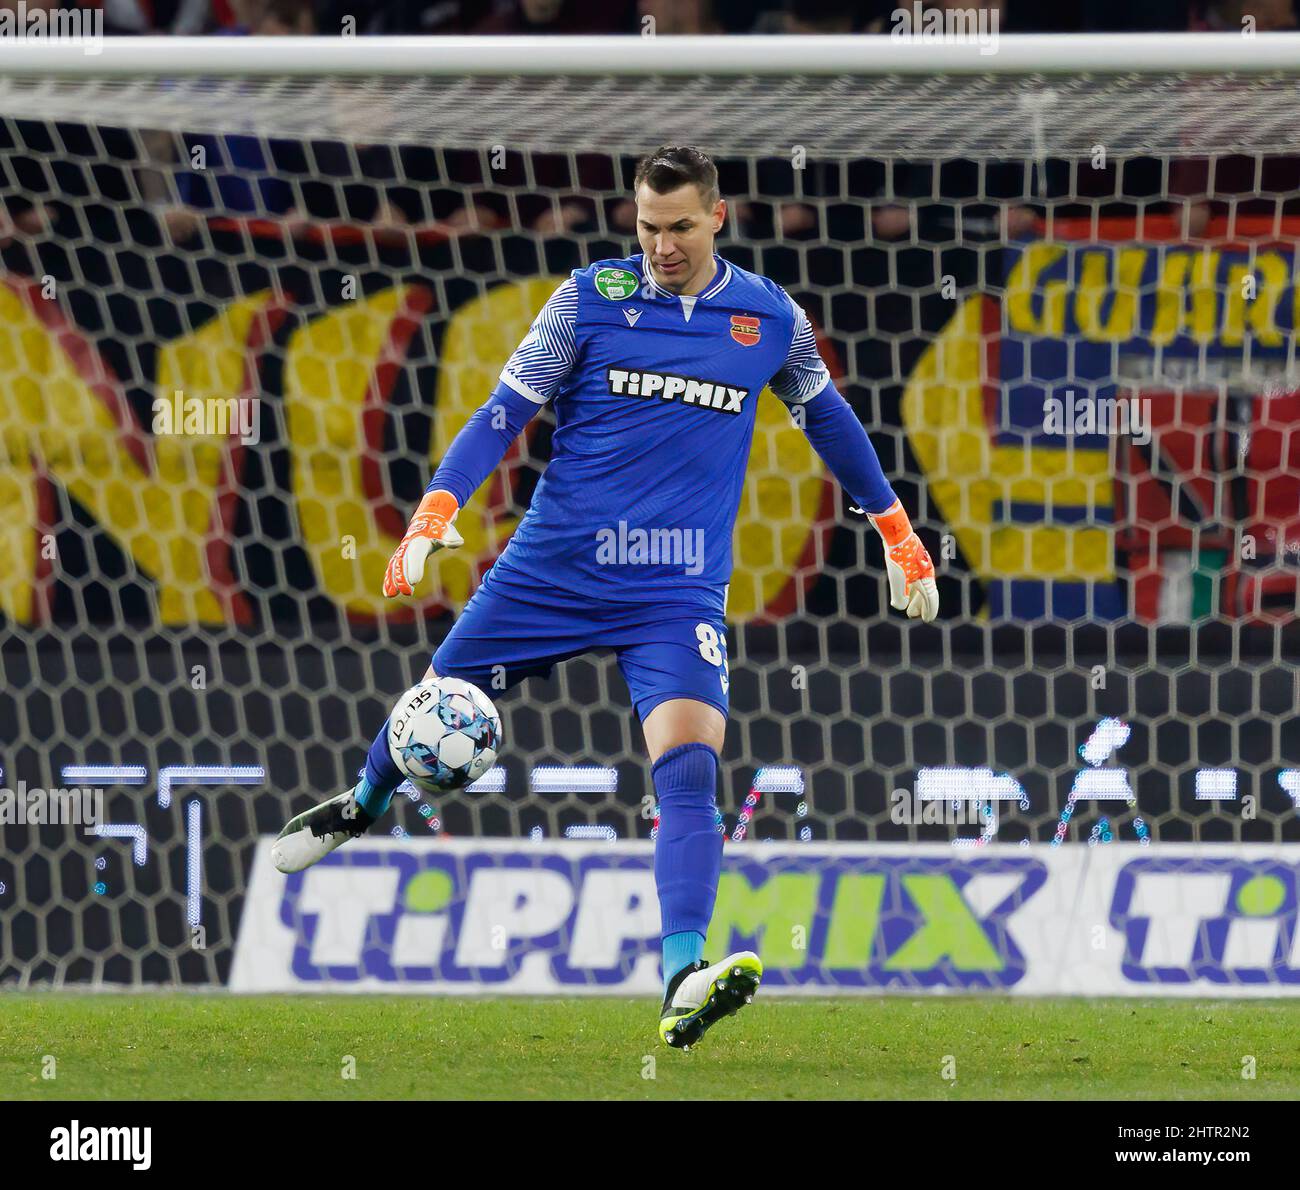 BUDAPEST, HUNGARY - MARCH 1: Tomas Tujvel of Budapest Honved kicks the ball during the Hungarian Cup Quarter Final match between Budapest Honved and Ferencvarosi TC at Bozsik Arena on March 1, 2022 in Budapest, Hungary. Stock Photo